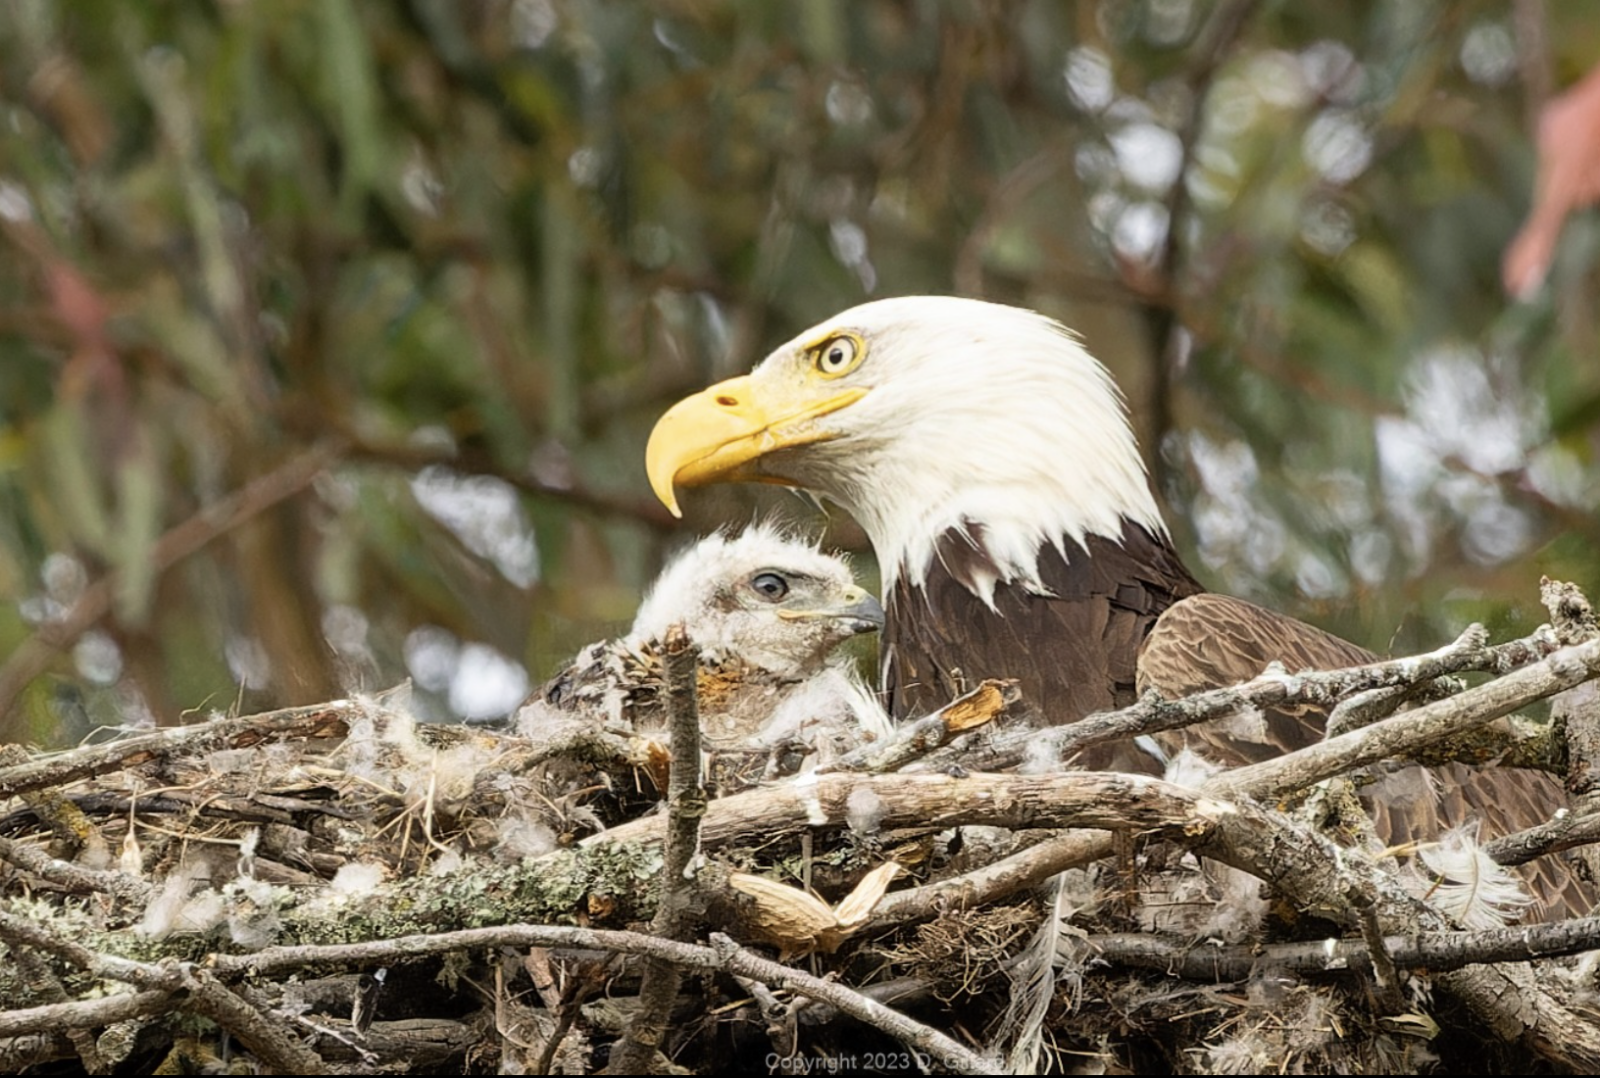 Adult eagle with hawk chick in nest.